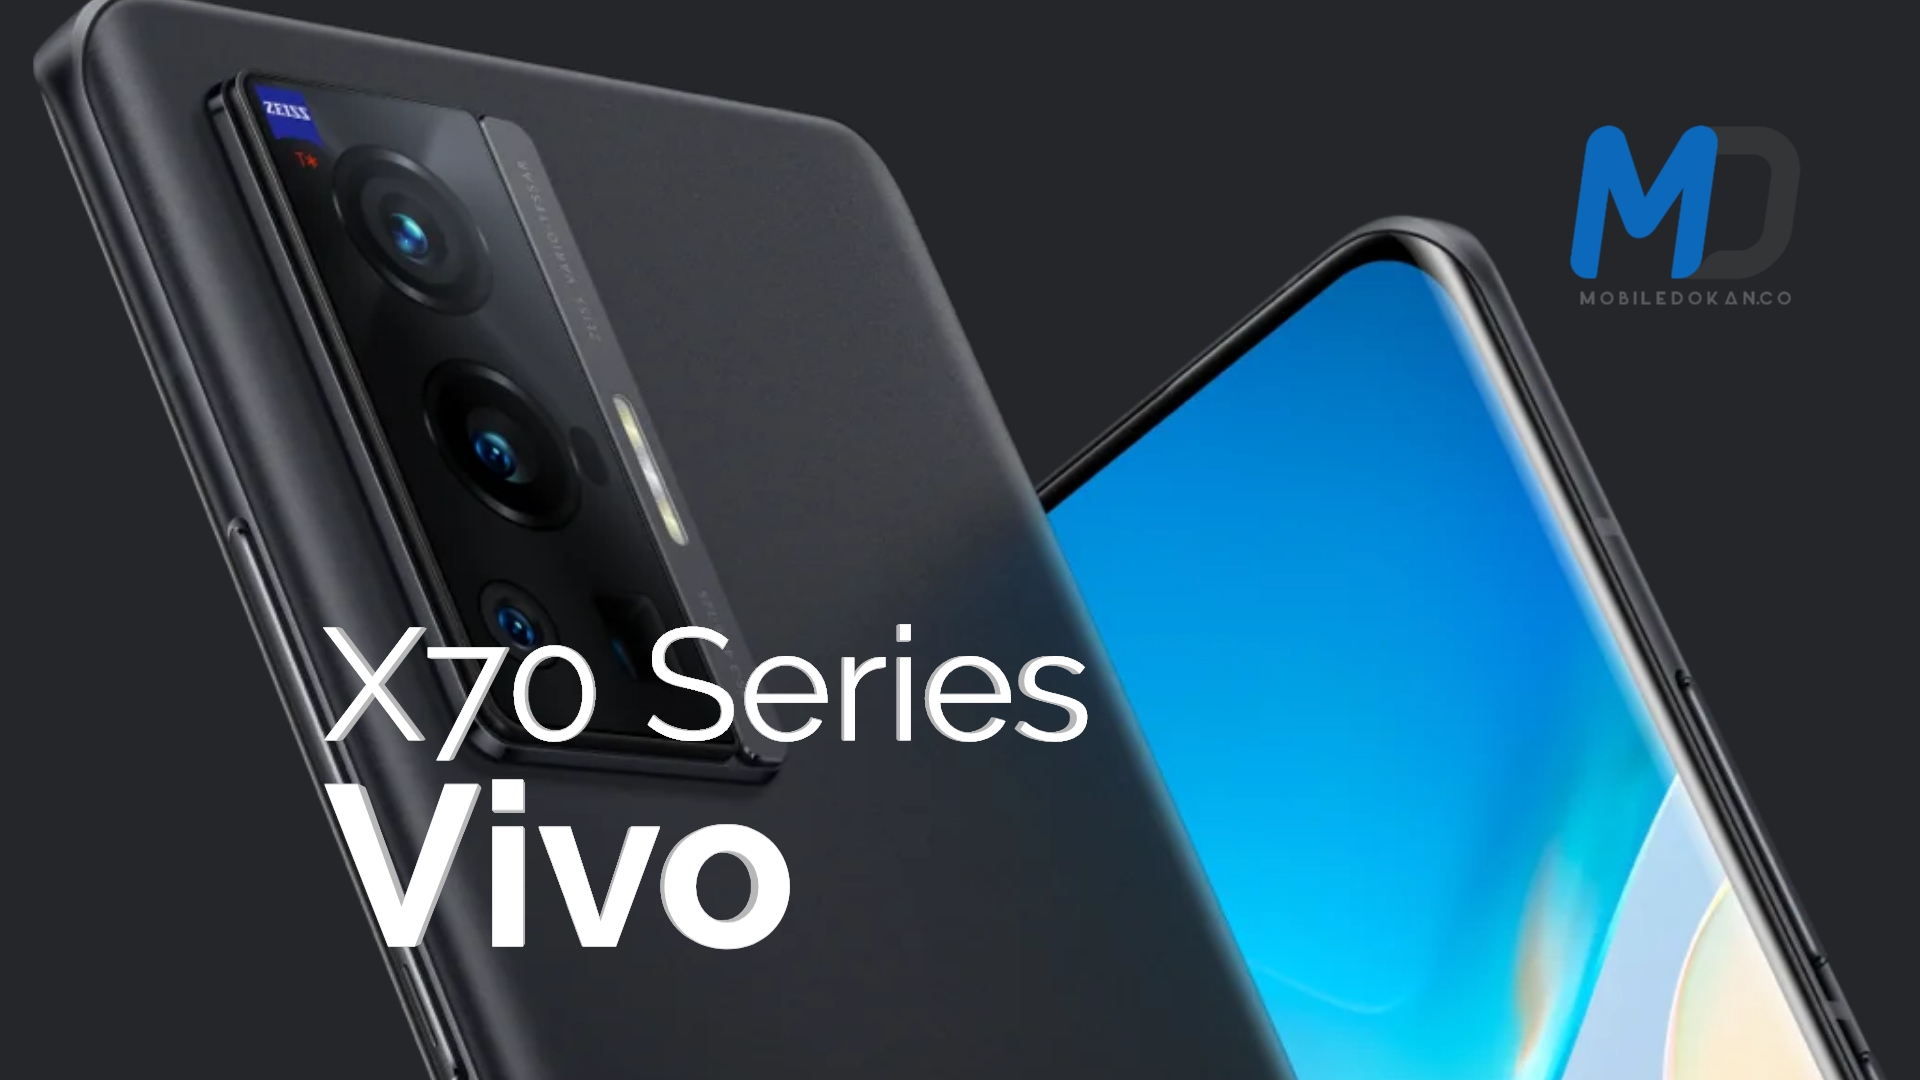 Vivo X70 series launched in India with 120Hz display